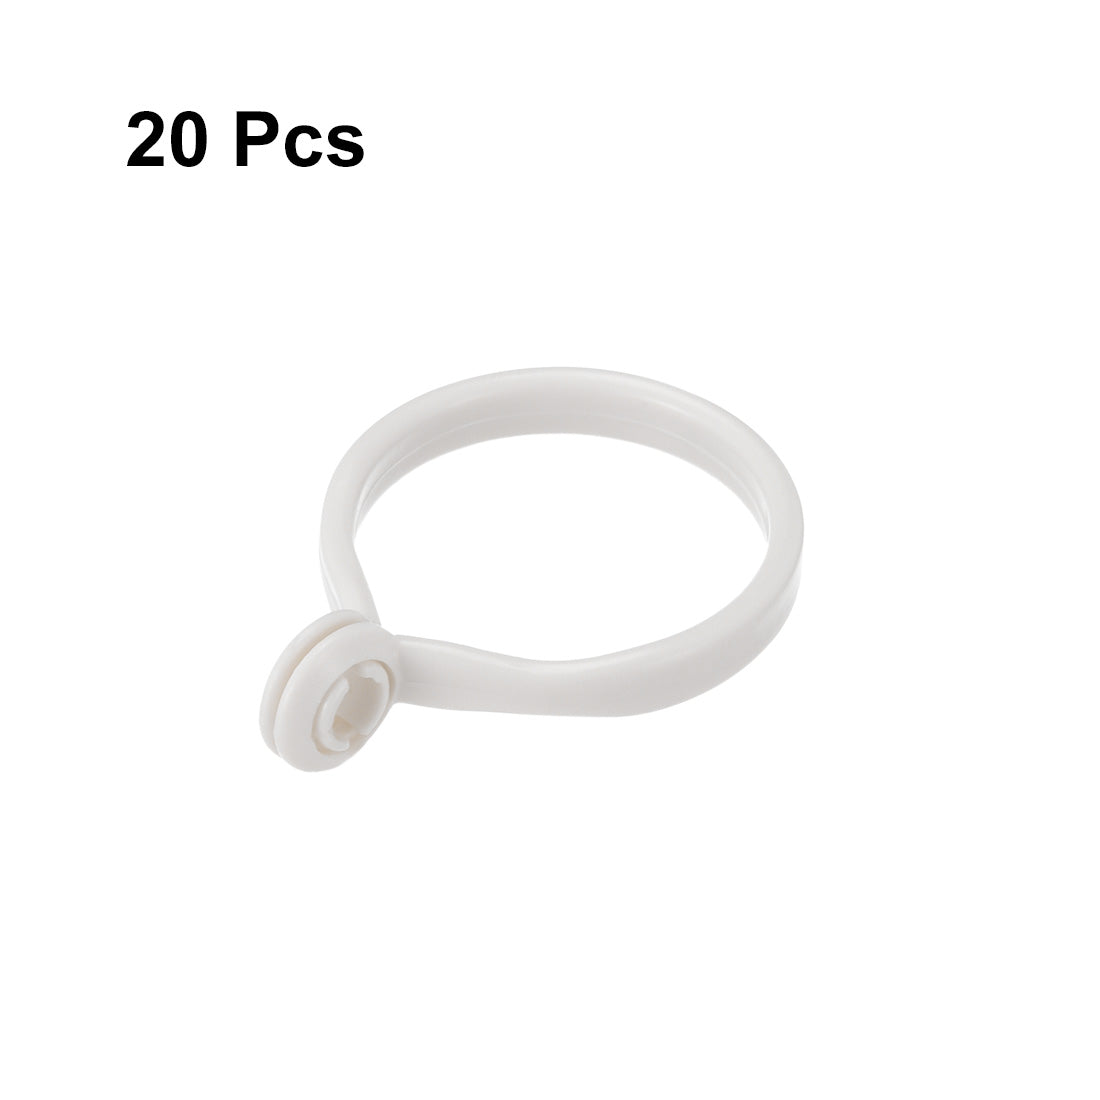 uxcell Uxcell Curtain Rings Plastic Drapery Ring with Snap Closure for Curtain Rods White 20 Pcs